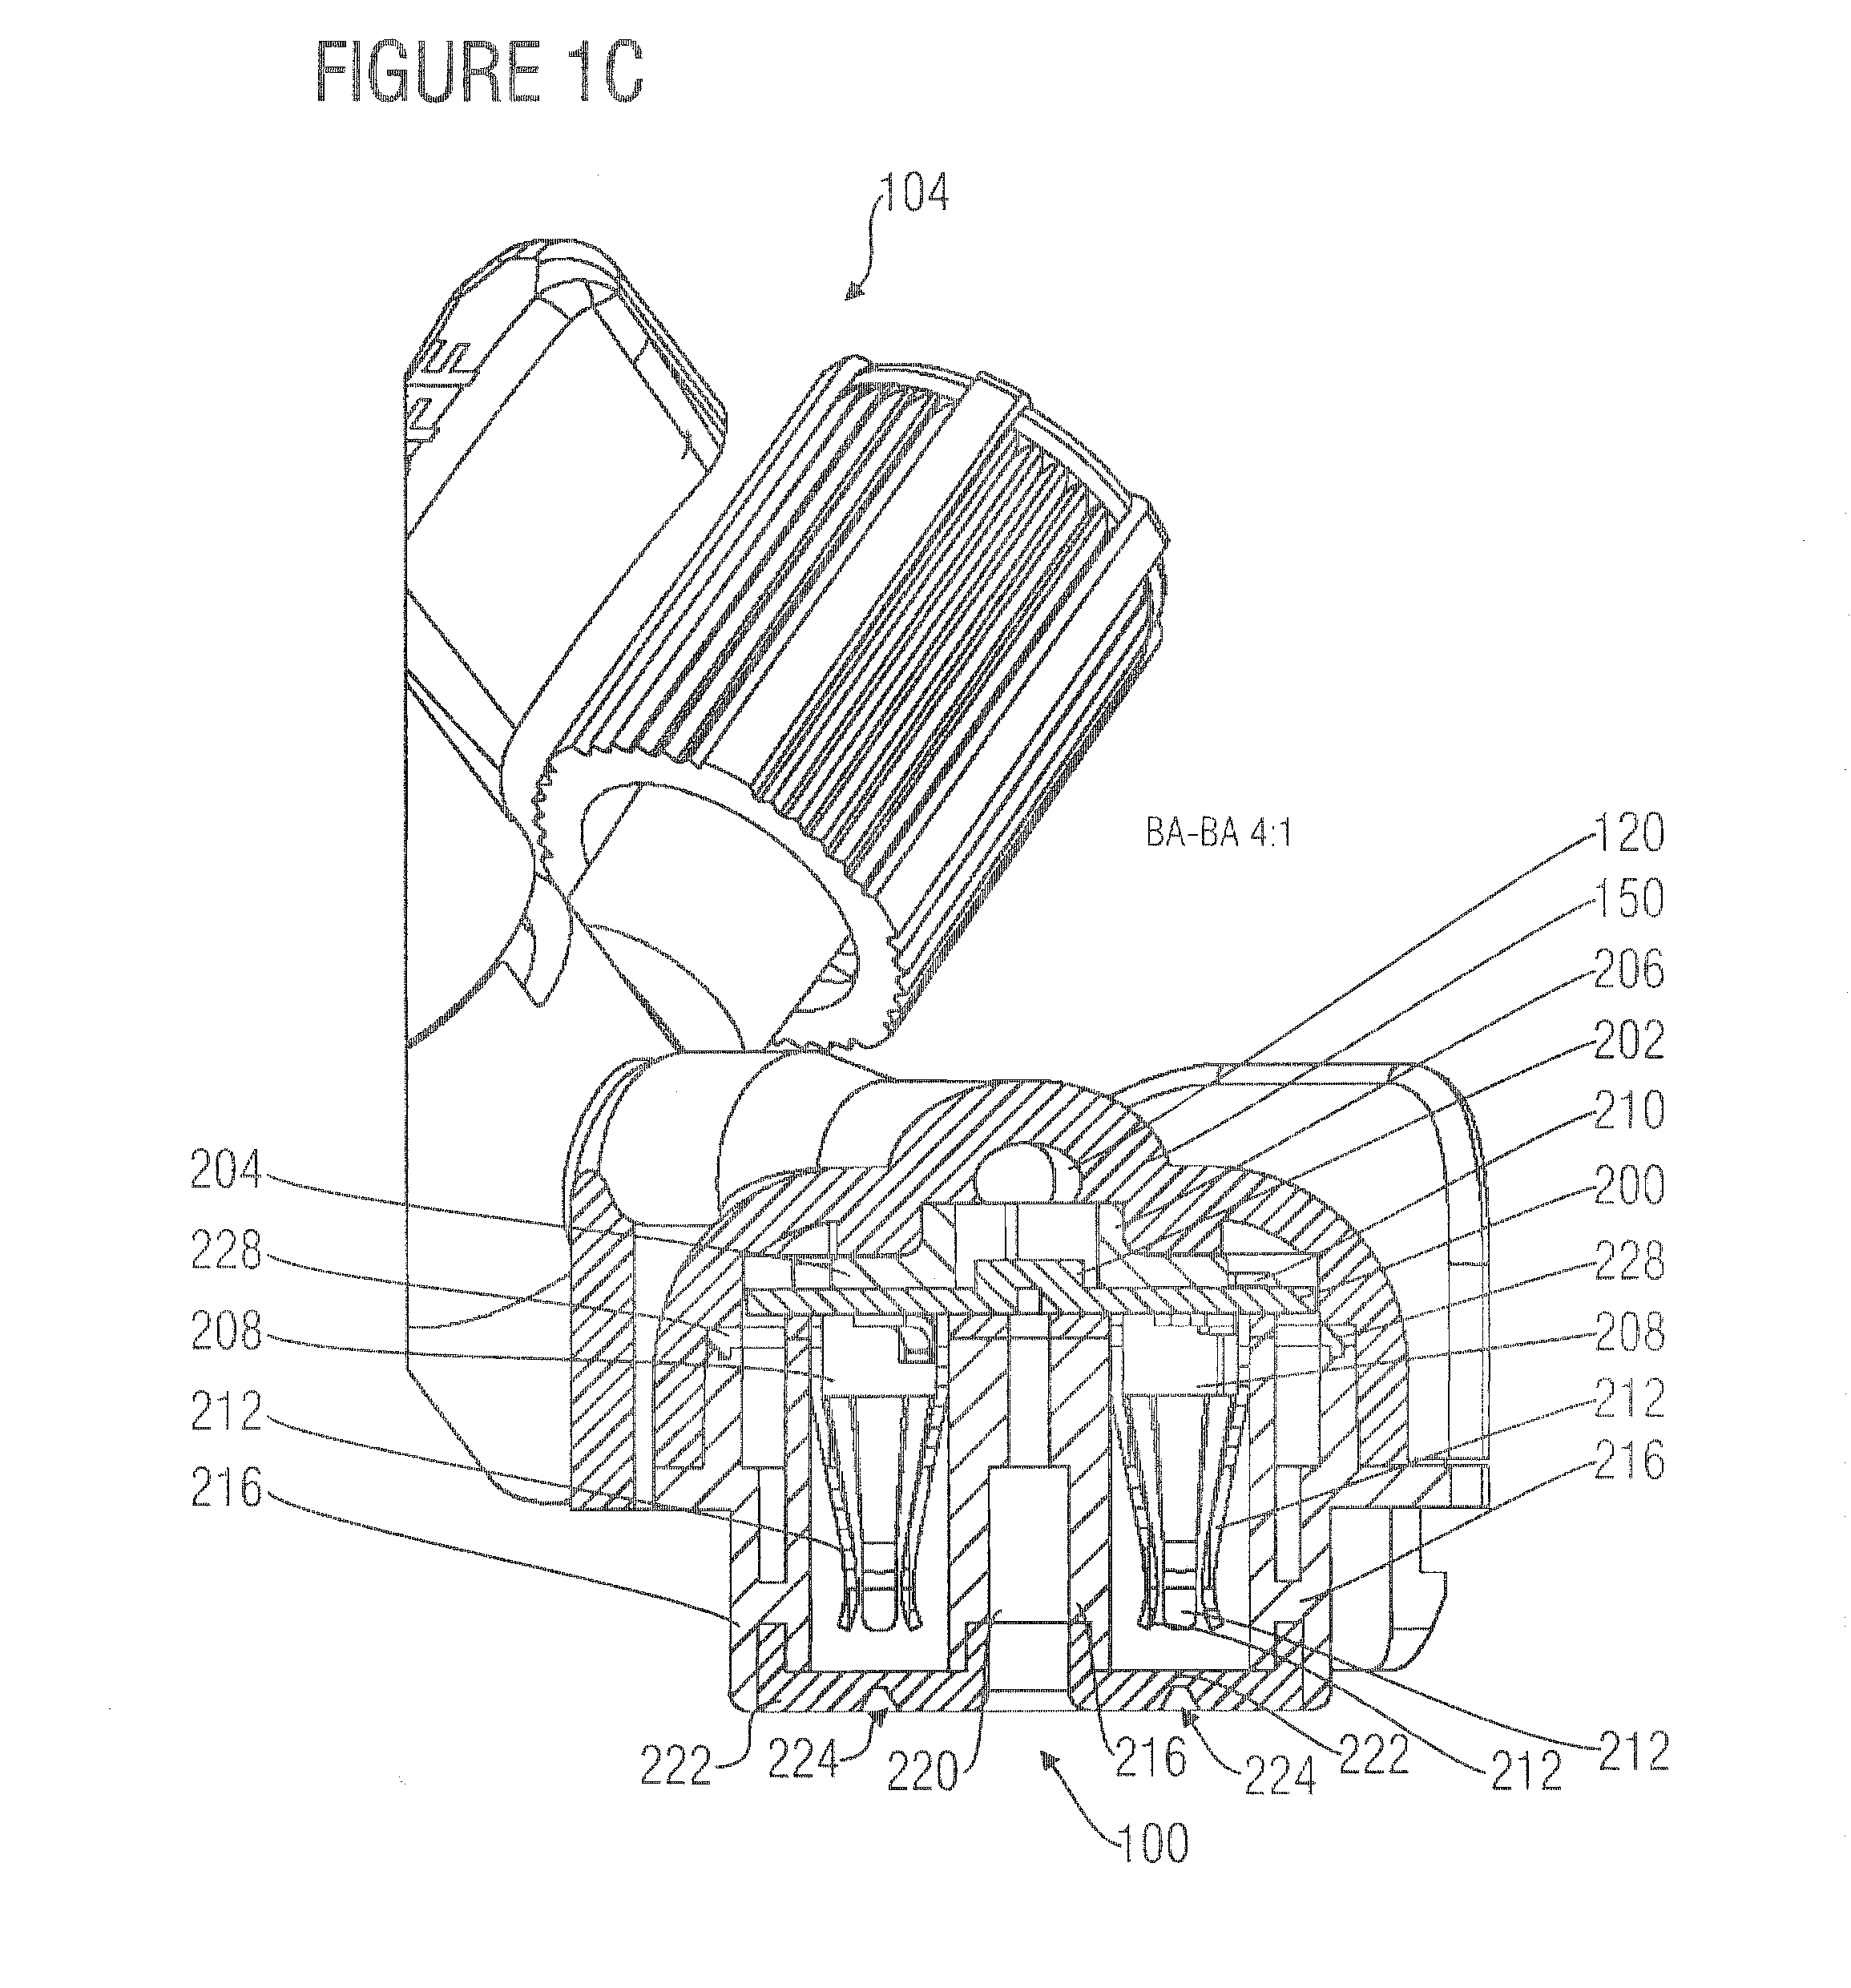 Method for manufacturing a fluid pressure measurement unit and a component for being used in a fluid pressure measurement unit